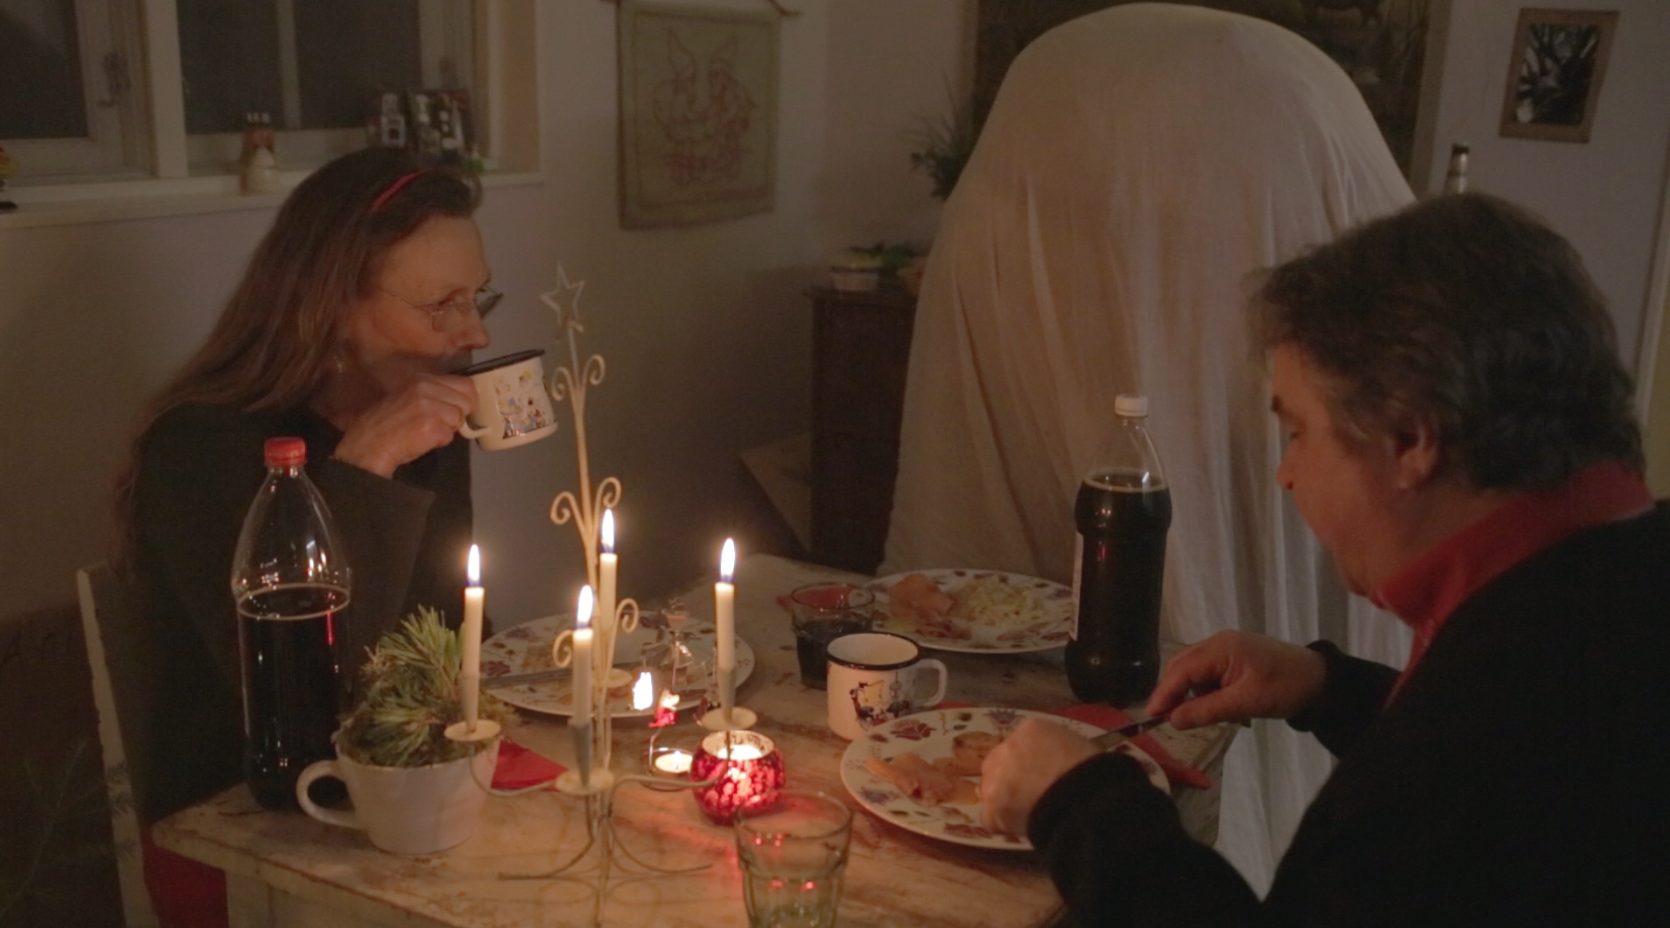 Dinner table with man and woman and un seen person draped in white sheet.